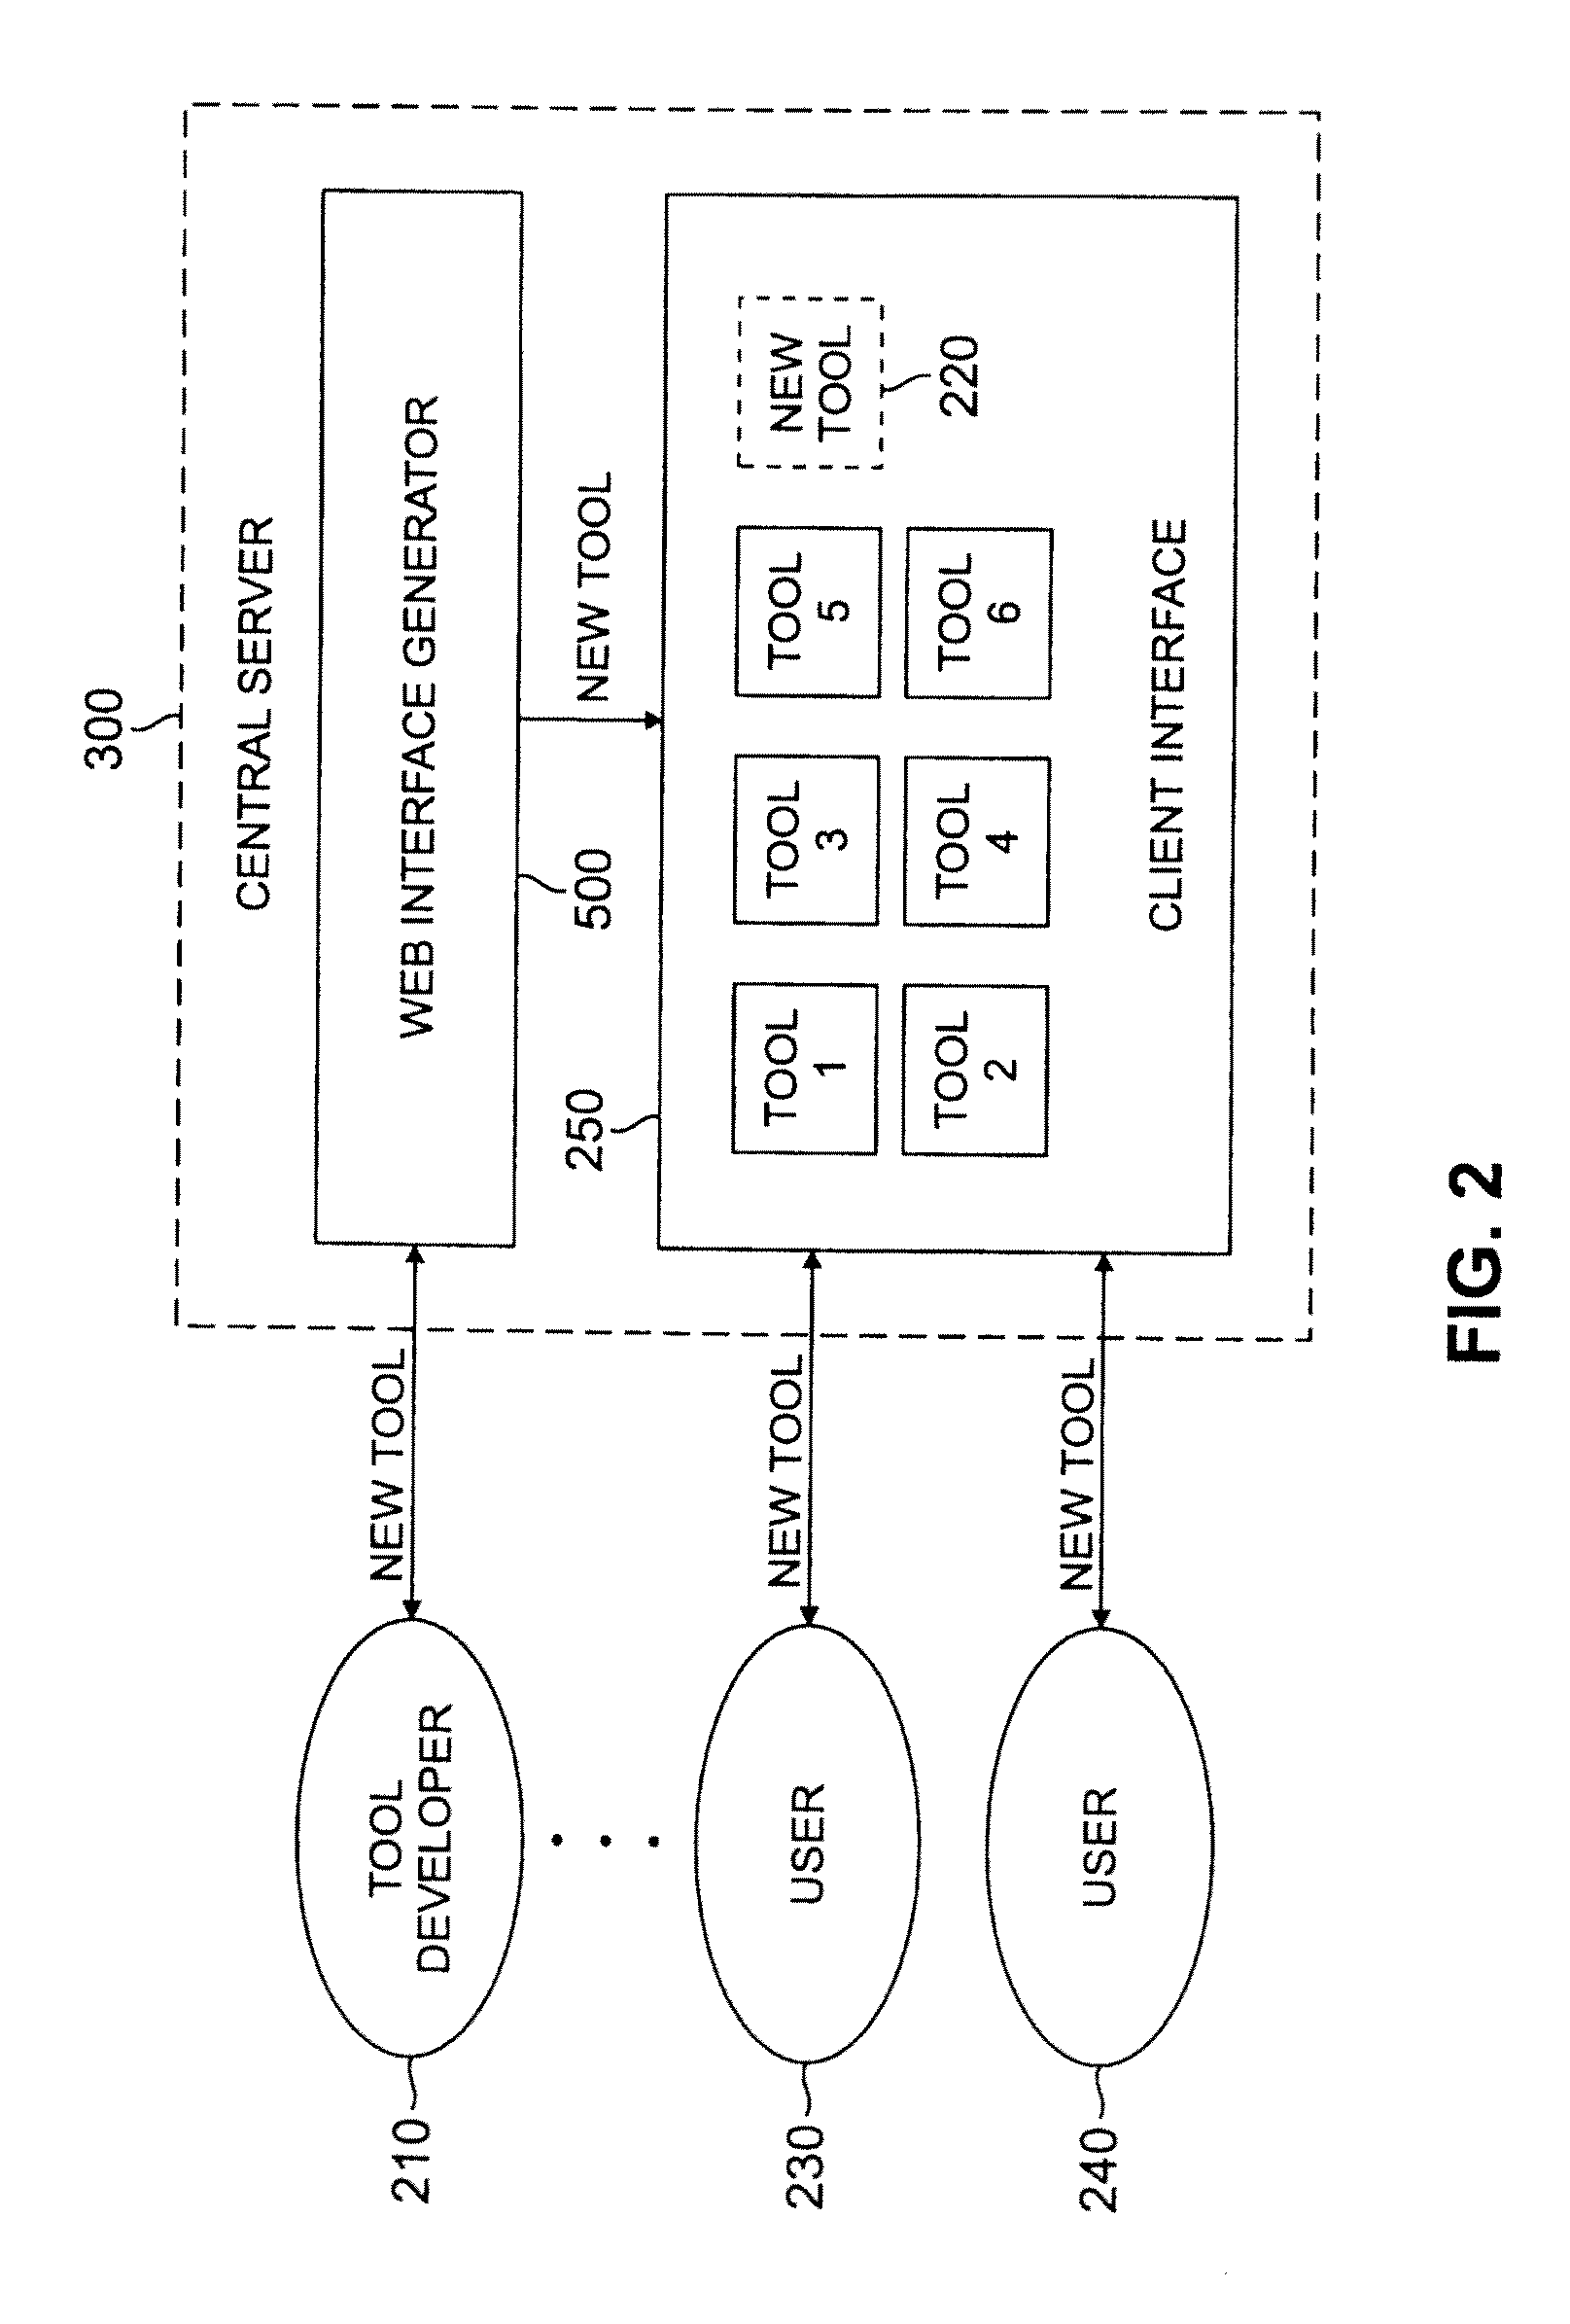 Method and Apparatus for Generating a Graphical Interface to Enable Local or Remote Access to an Application Having a Command Line Interface